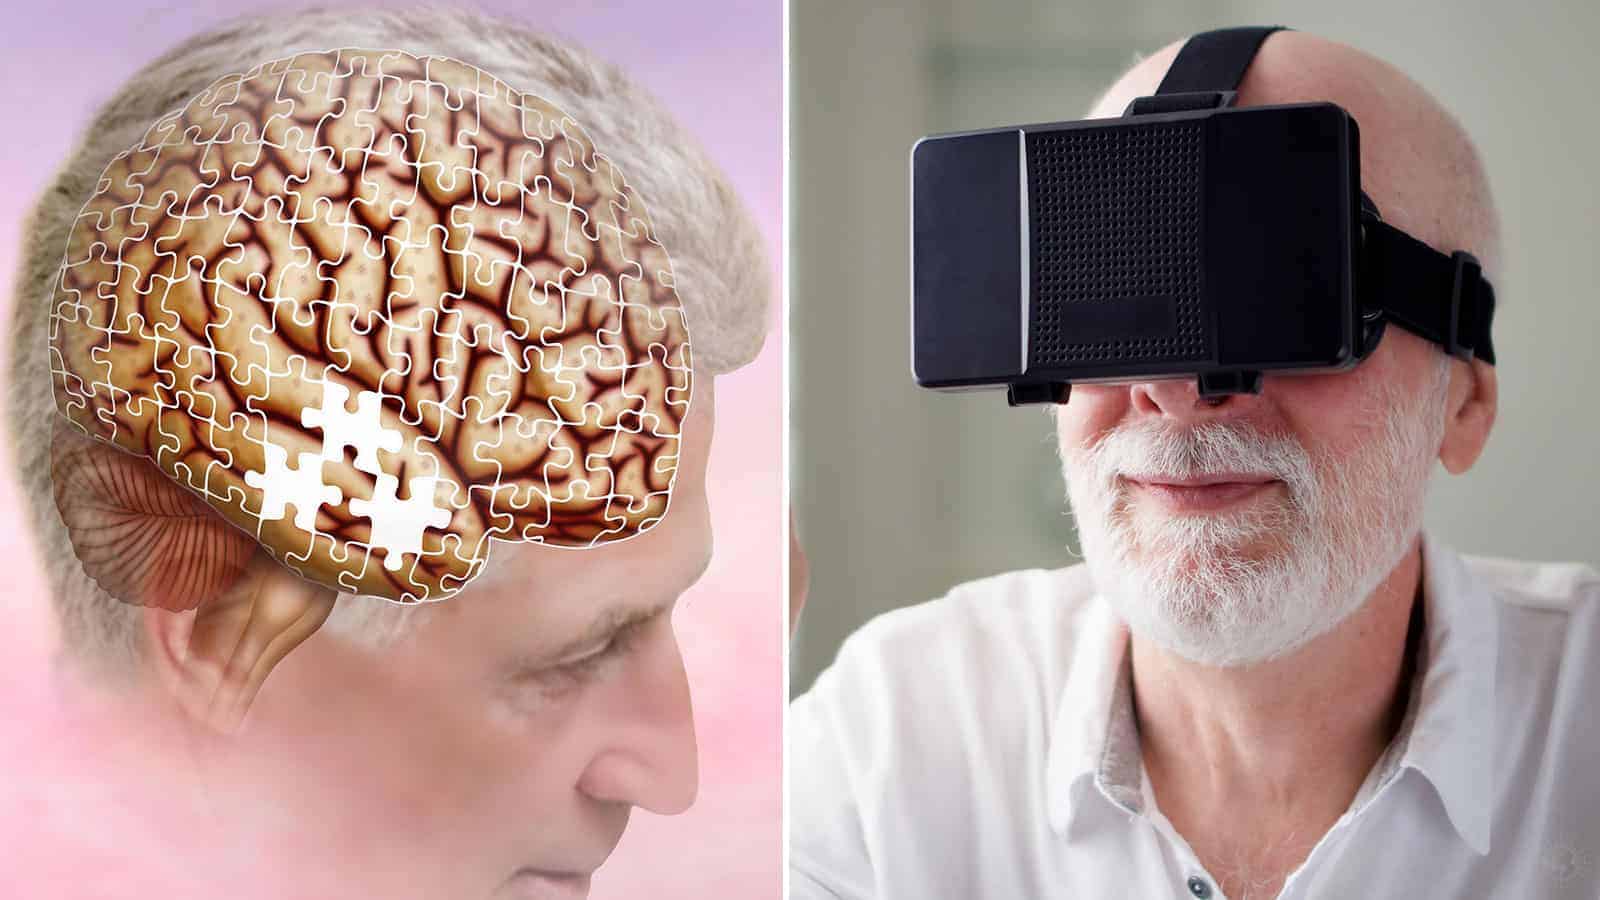 Science Explains How Virtual Reality Improves Life for Alzheimer’s Patients